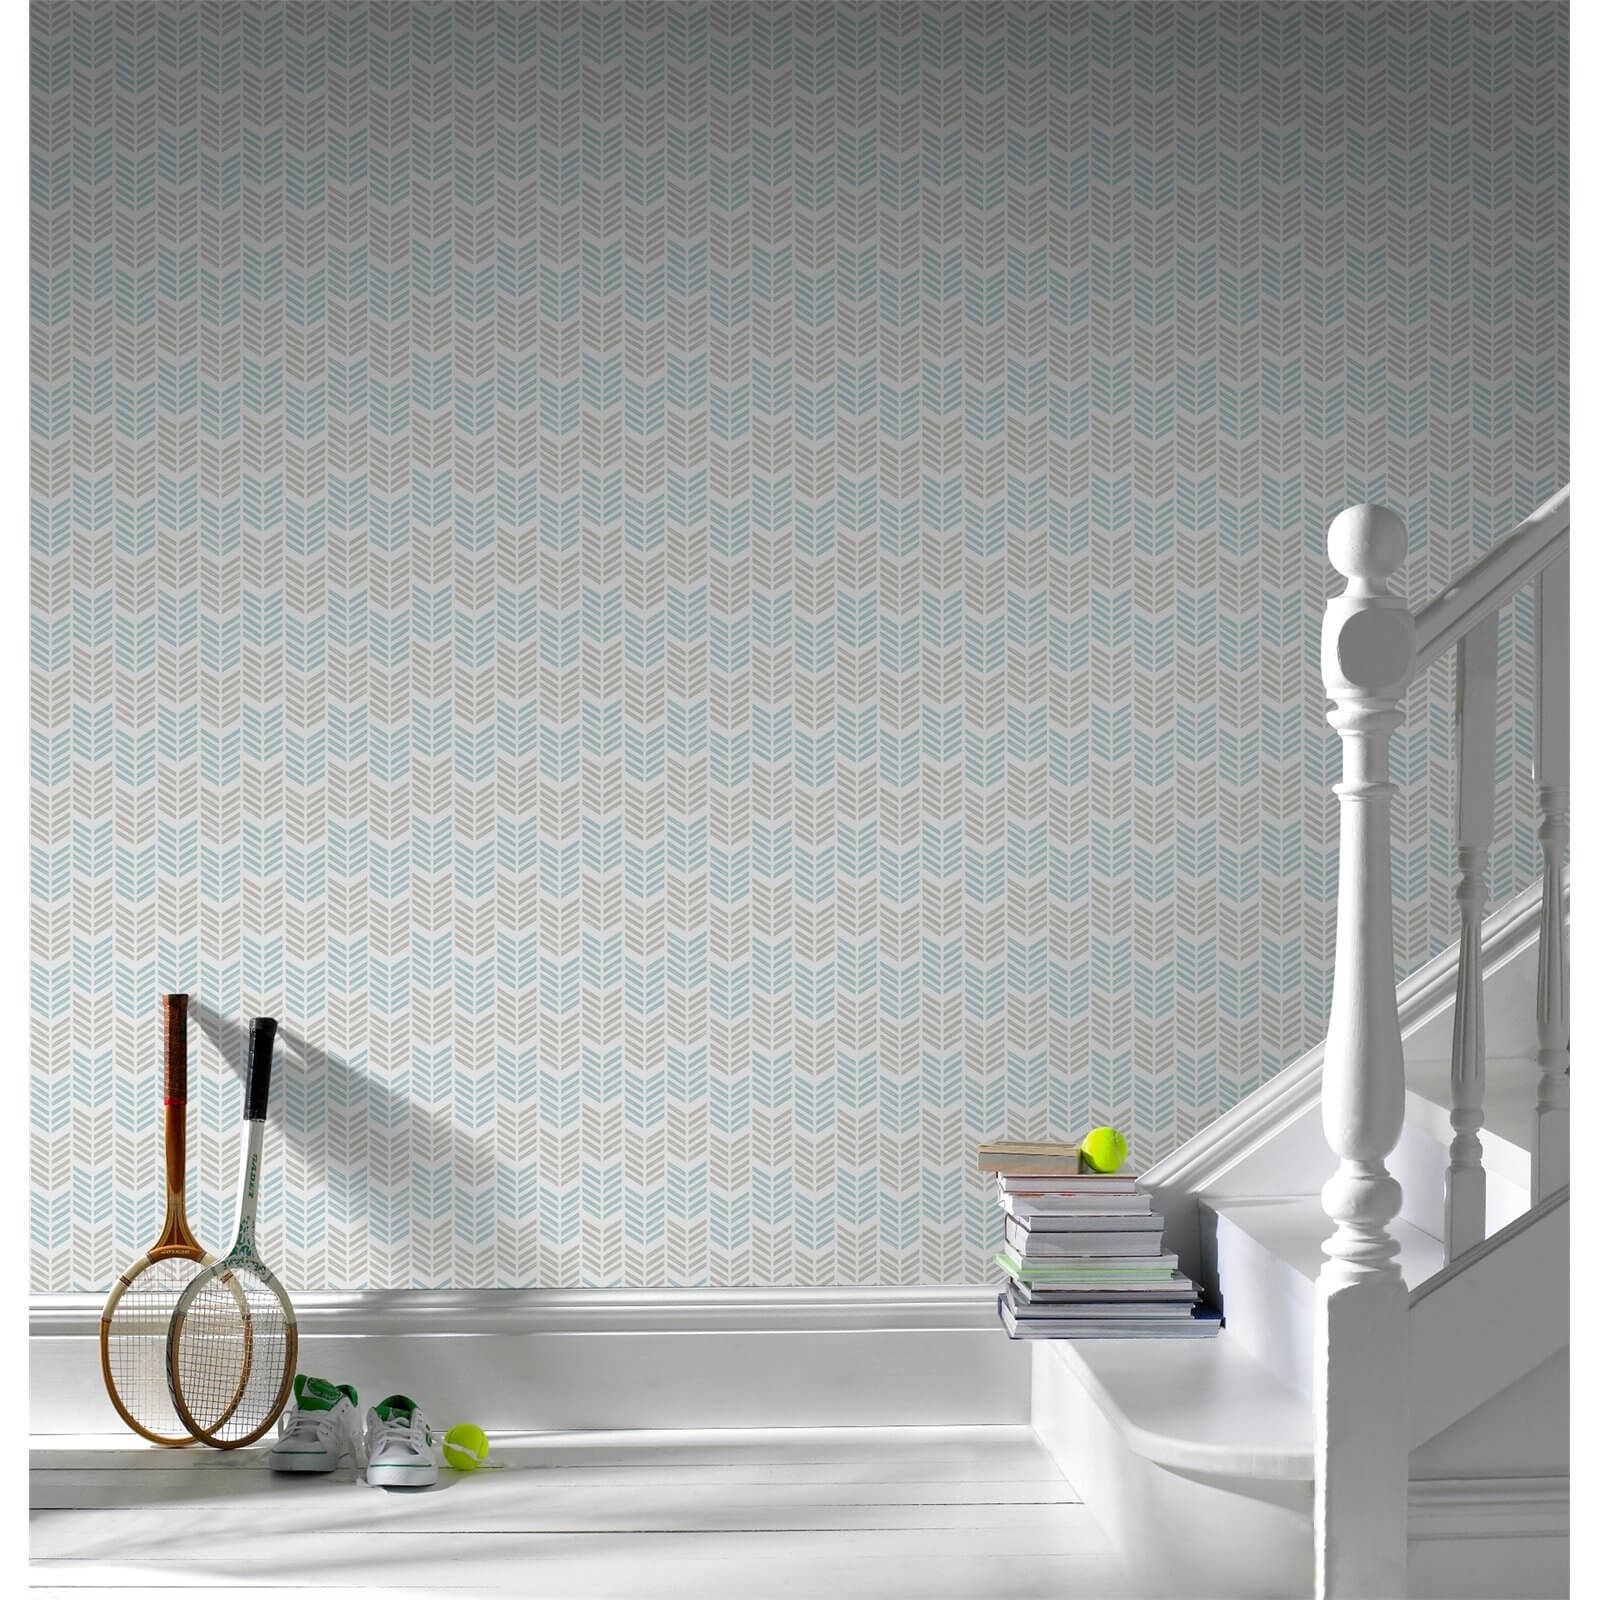 Superfresco Easy Paste the Wall Oiti Wallpaper - Taupe & Blue